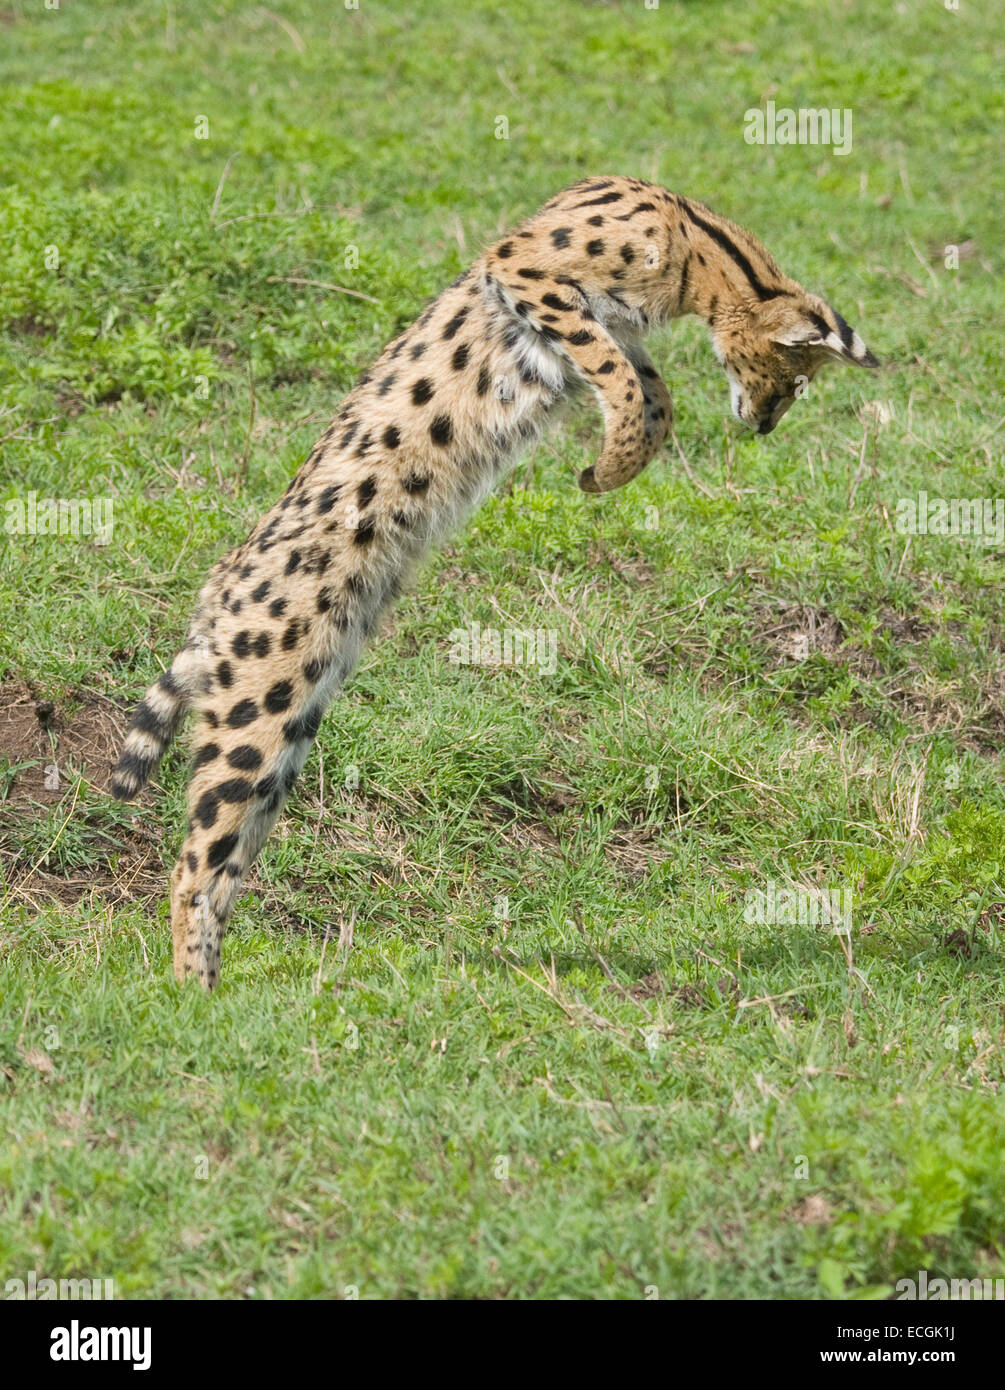 Serval cat jumping in plains Stock Photo